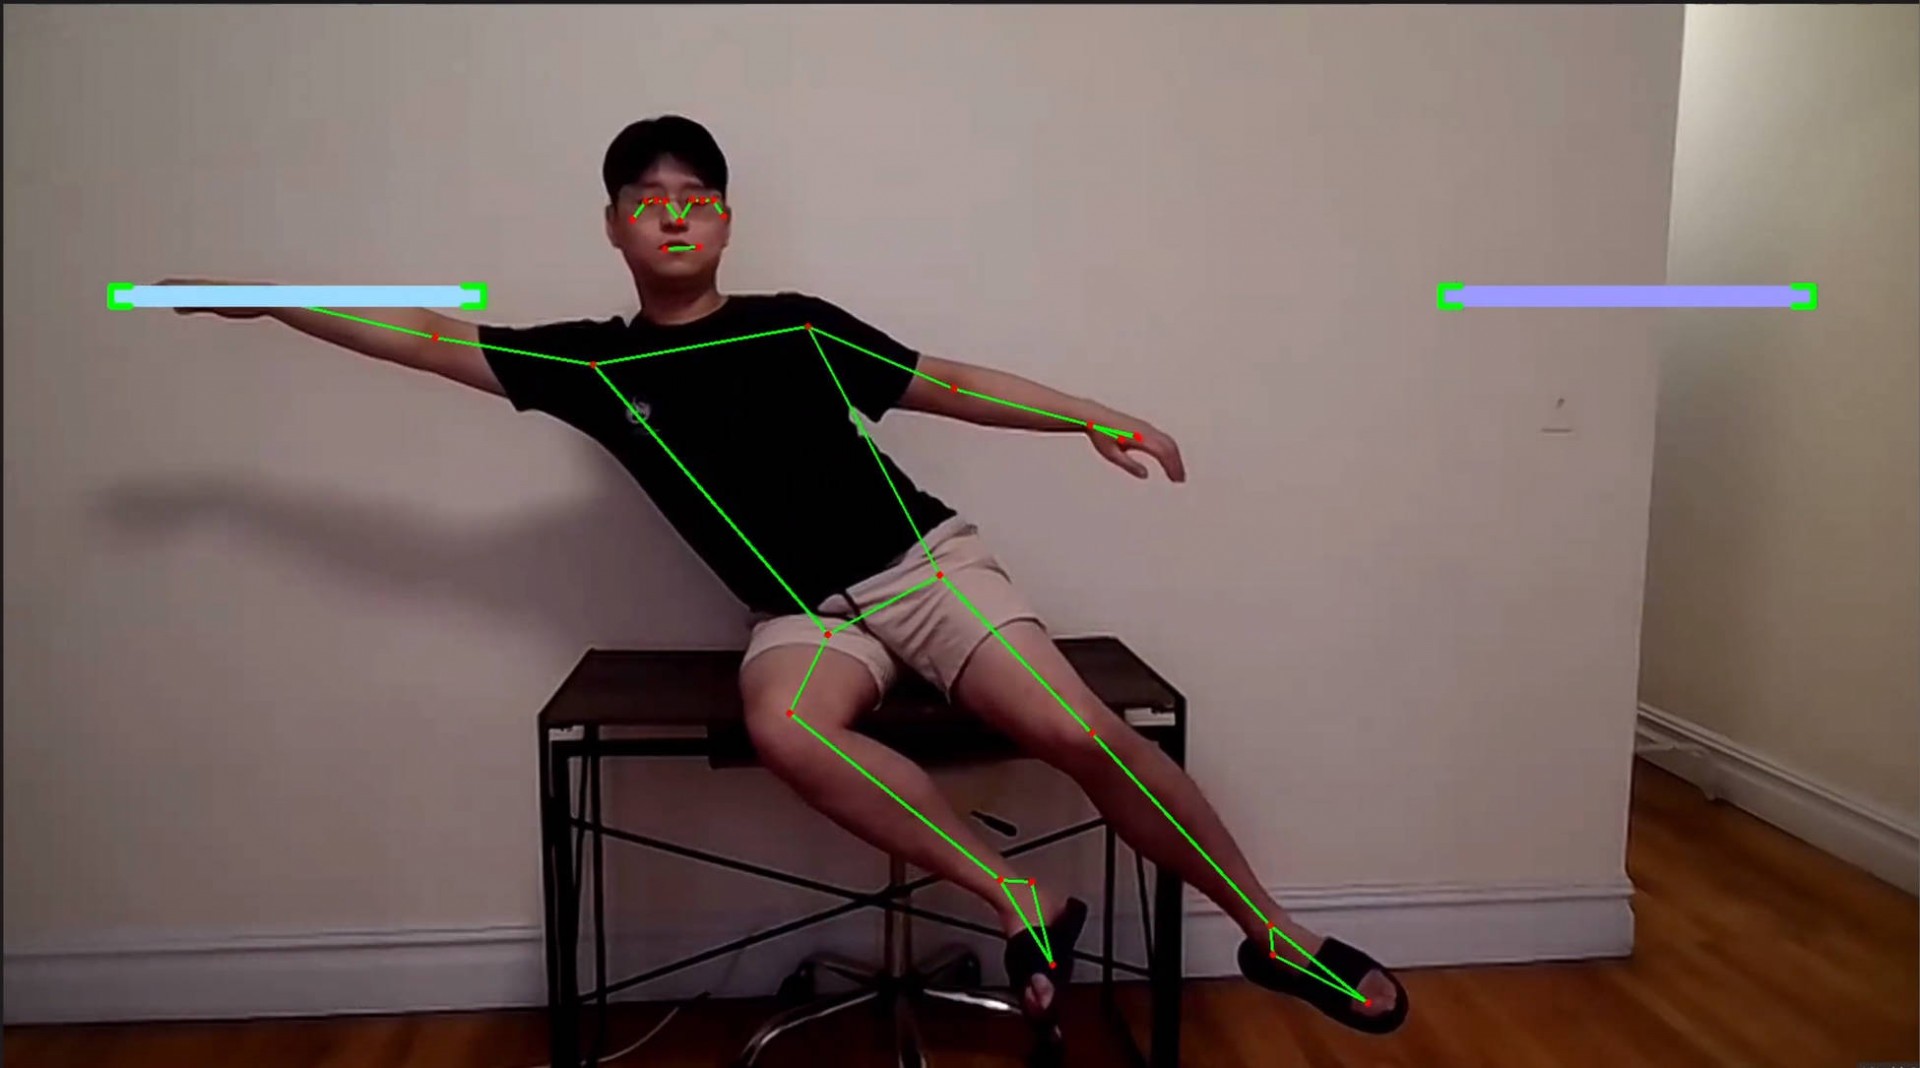 Remote XR for movement analysis